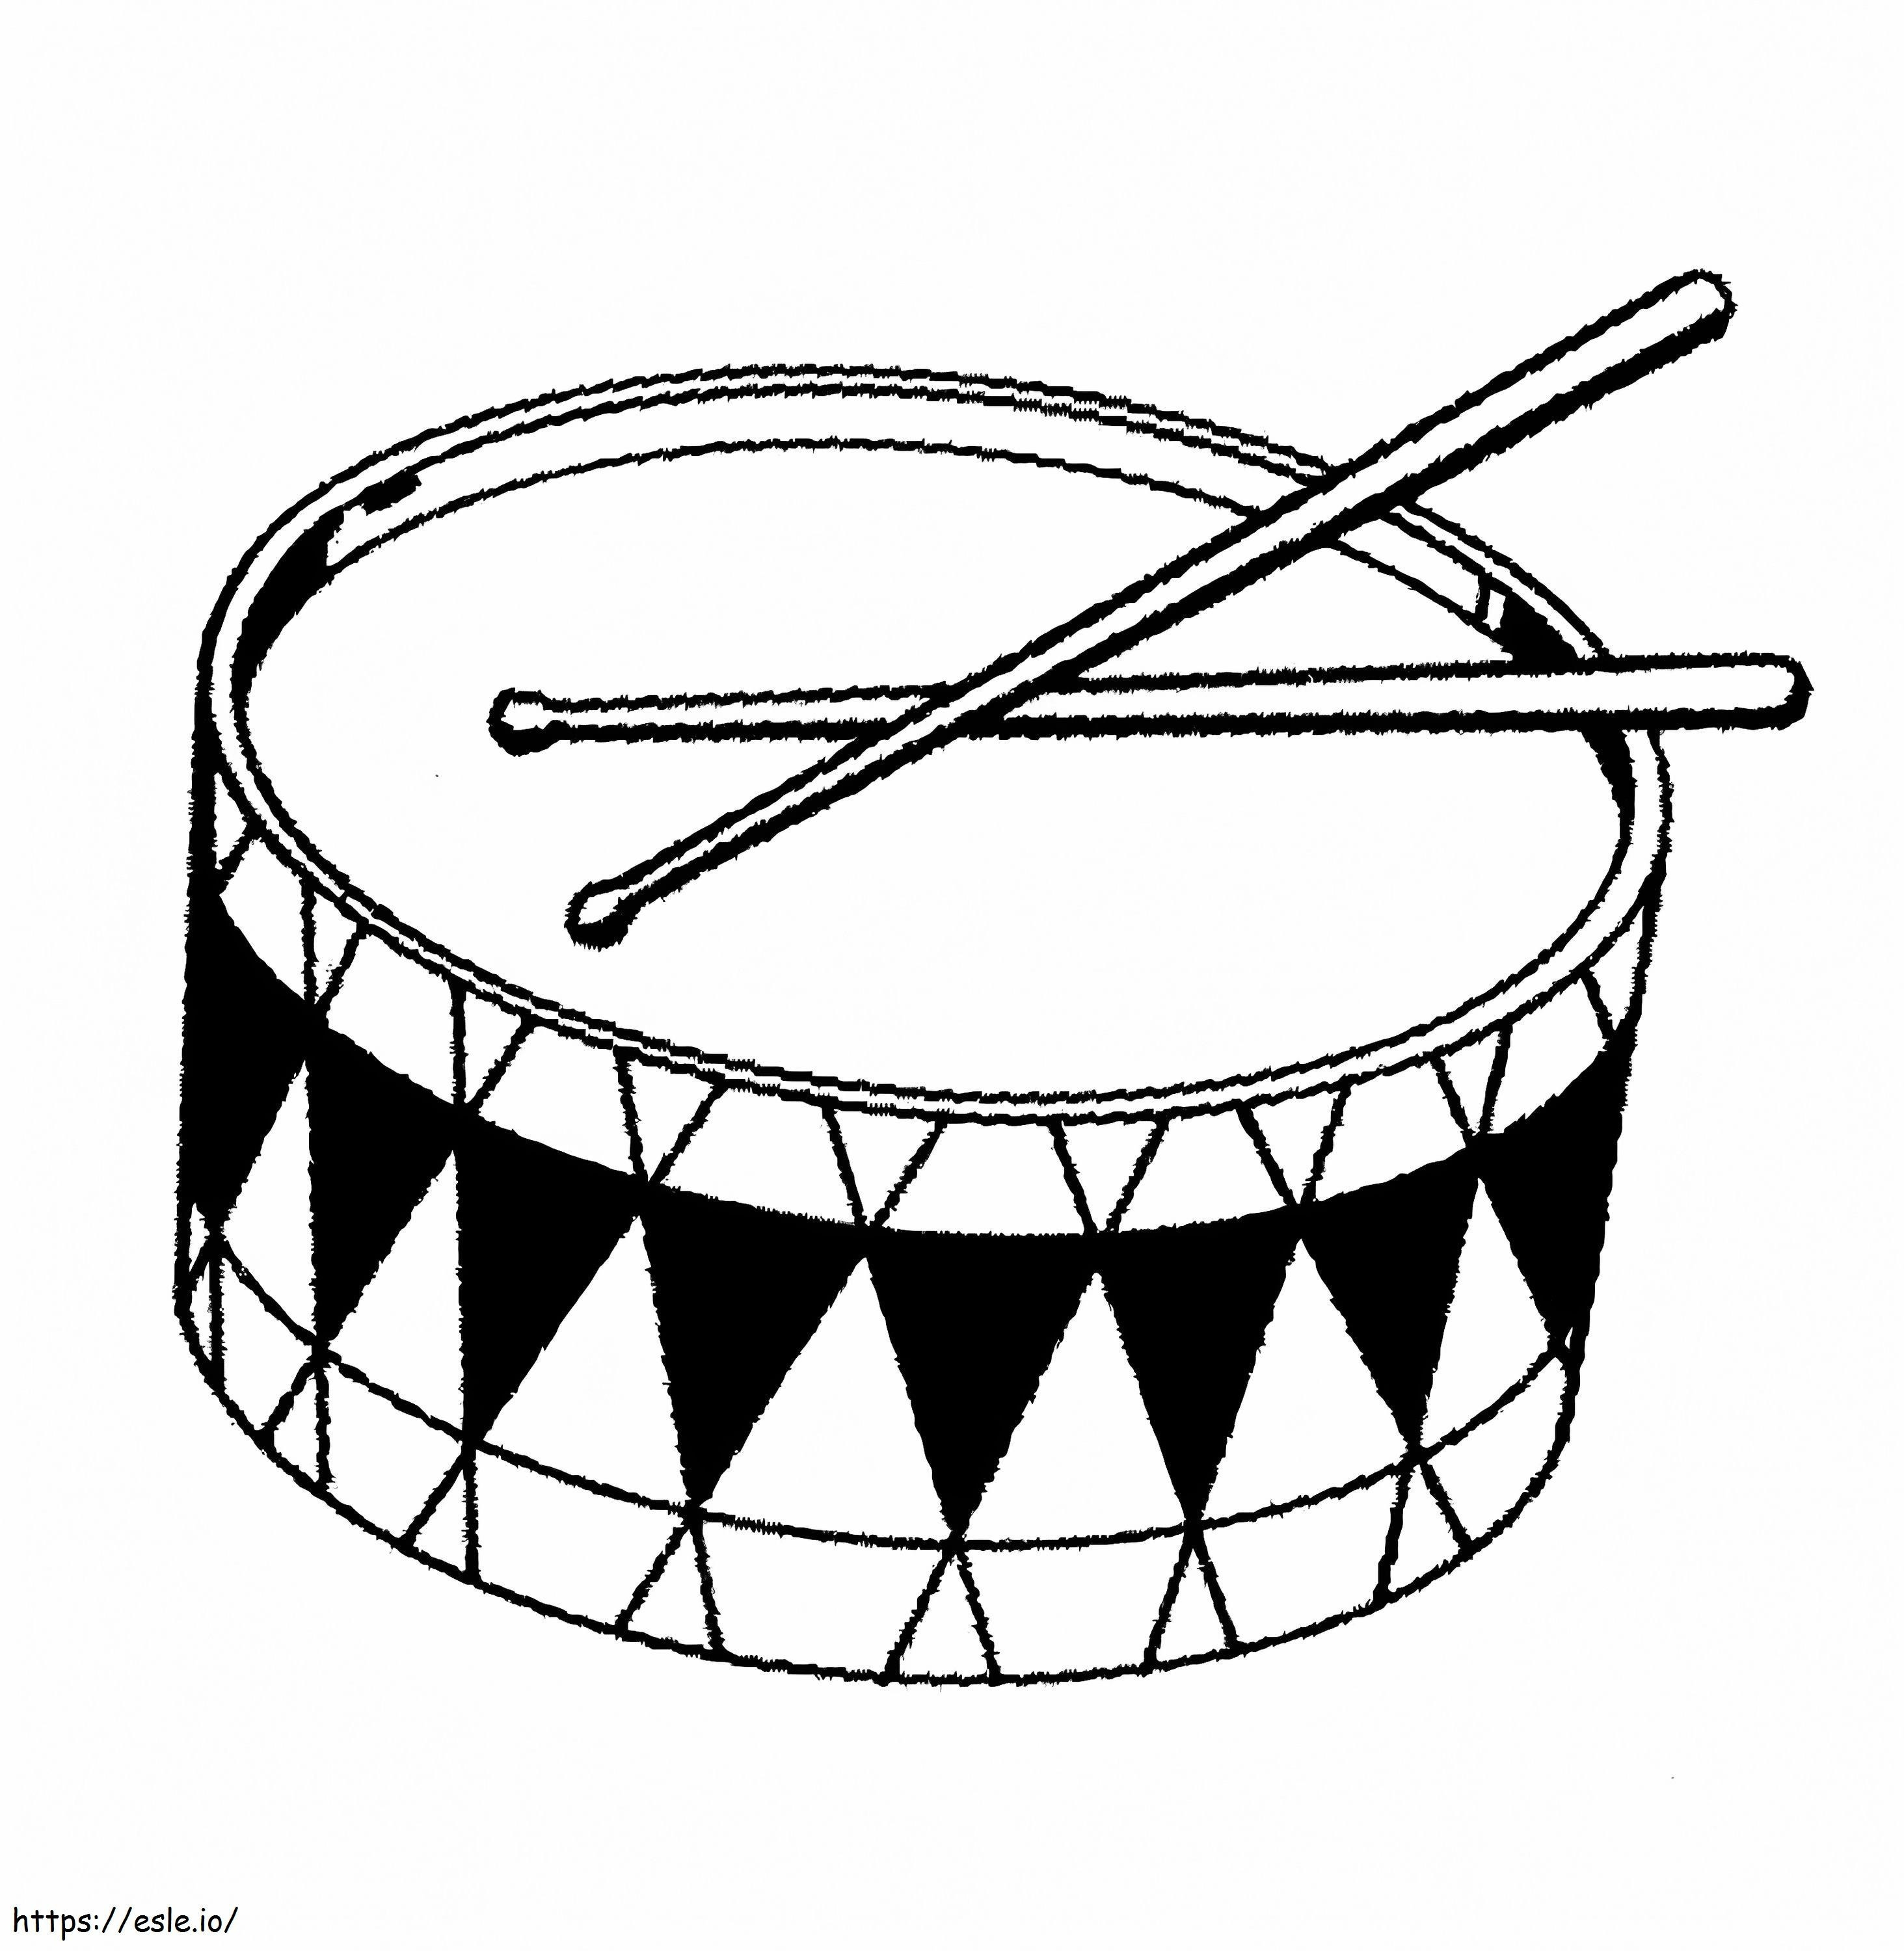 drums coloring page